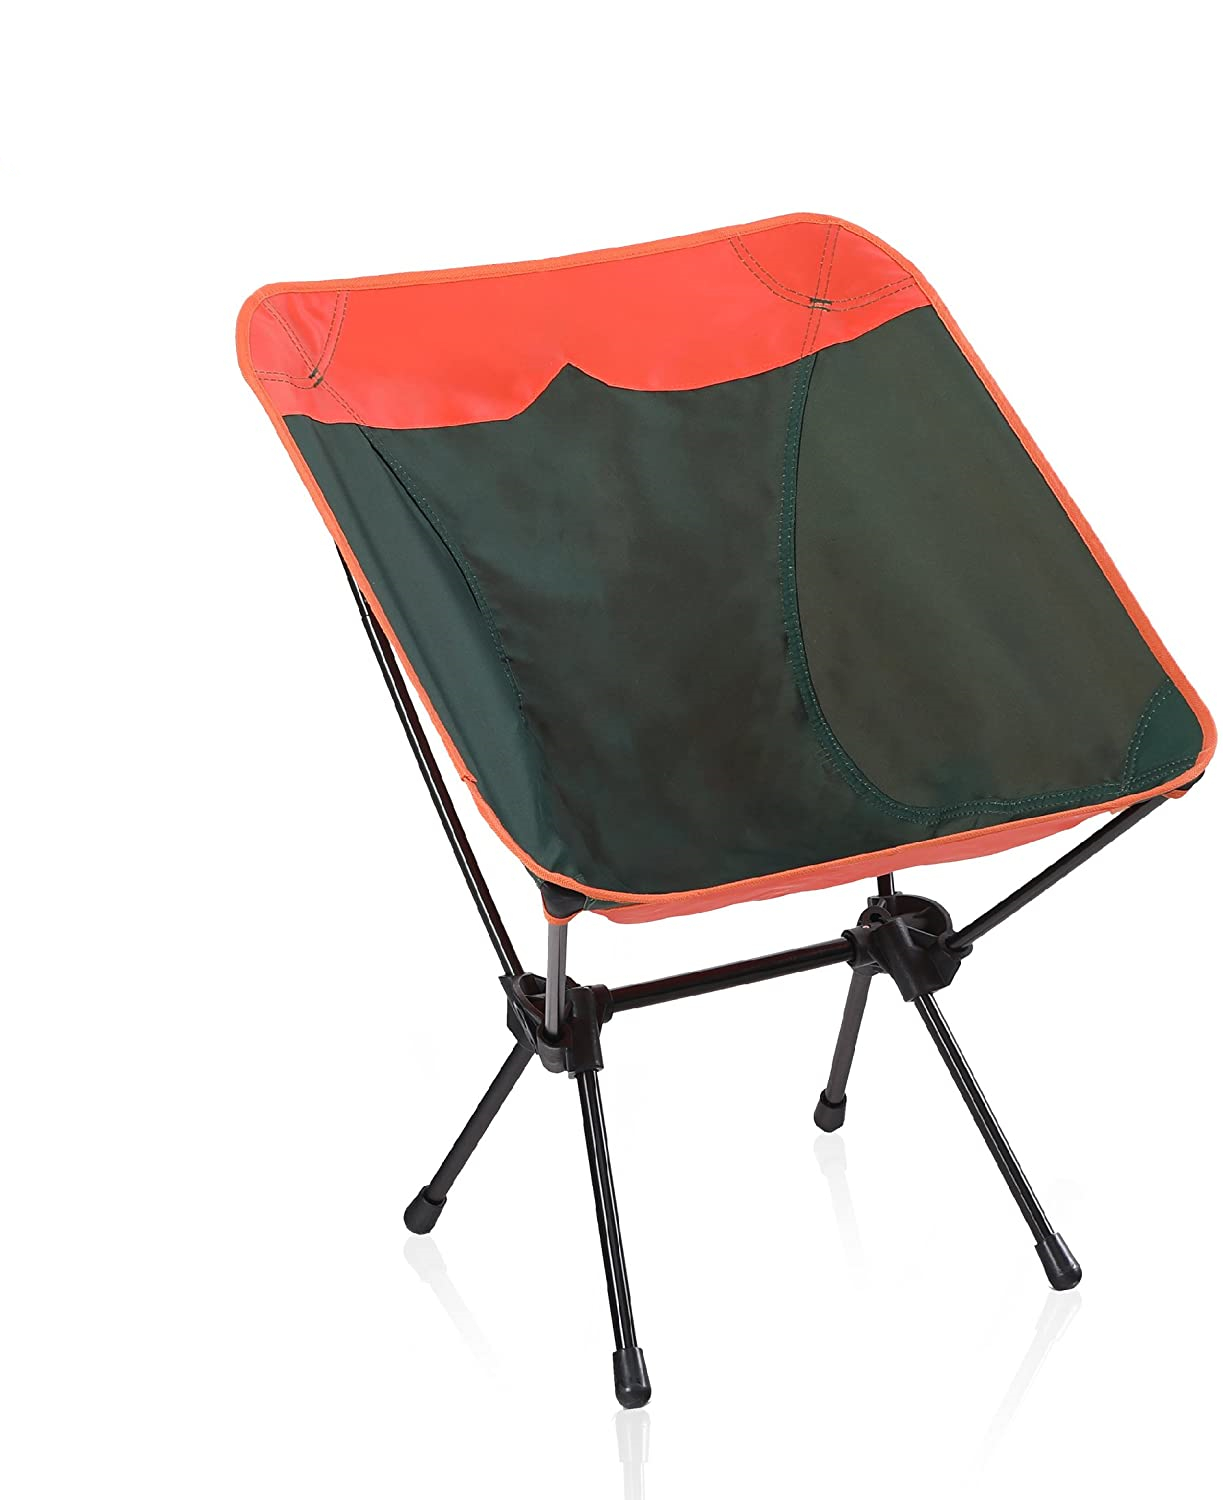 MF Studio Camping Chair Portable Ultralight Compact Folding Camping Backpack Chairs with Carry Bag Heavy Duty 225lb Capacity Compact Lightweight Folding Chair for The Outdoors, Camping, Hiking,Orange - image 2 of 6